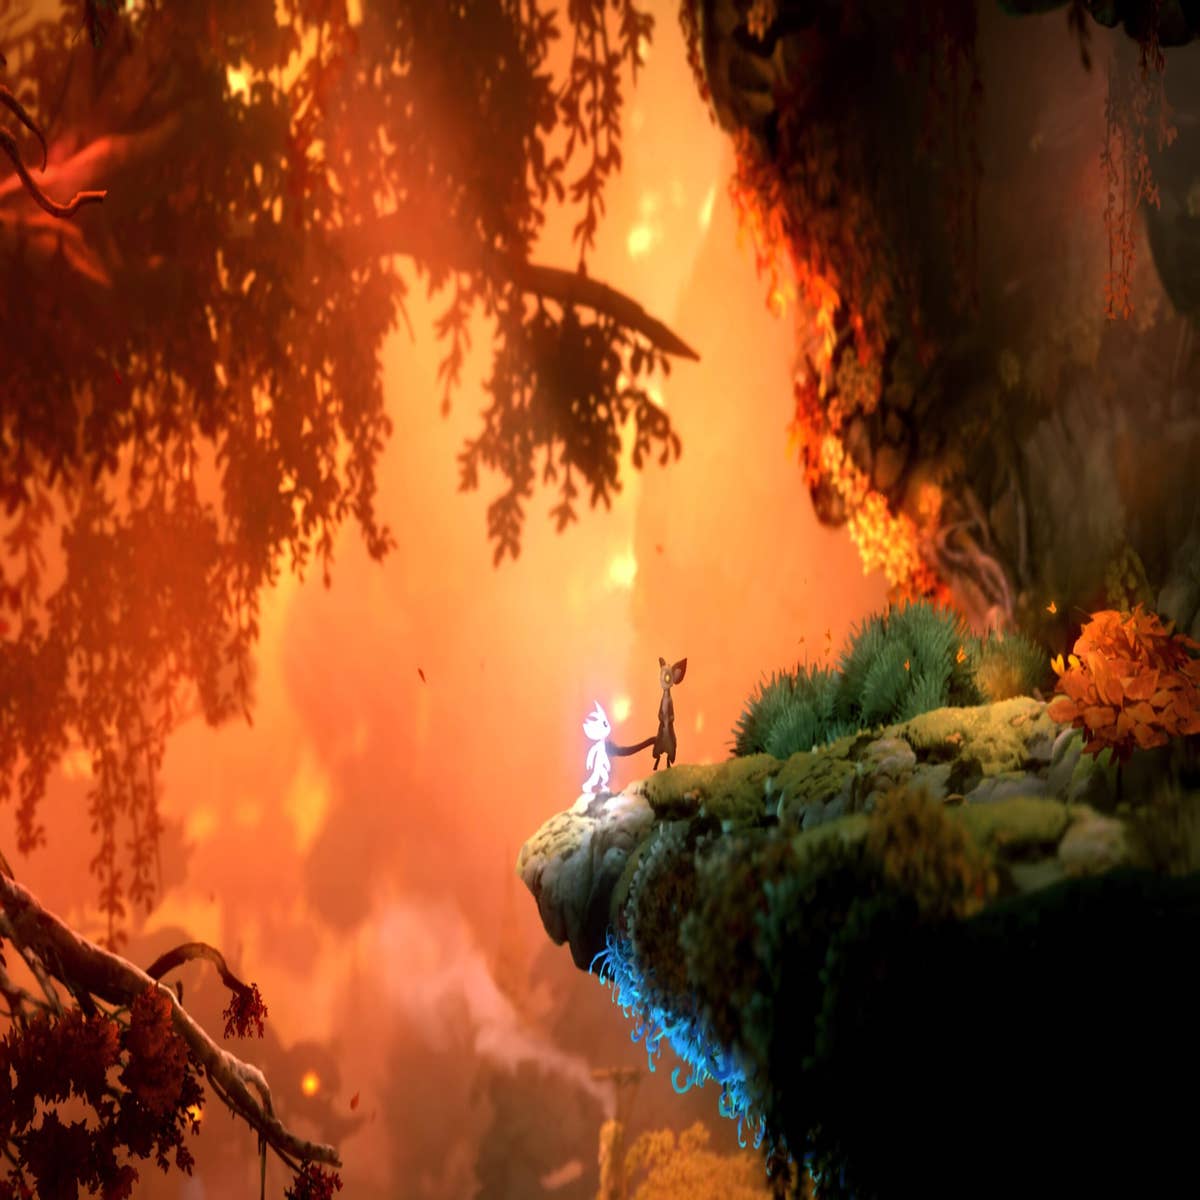 Ori and the Will of the Wisps Dev Talks Difficulty Creating Switch